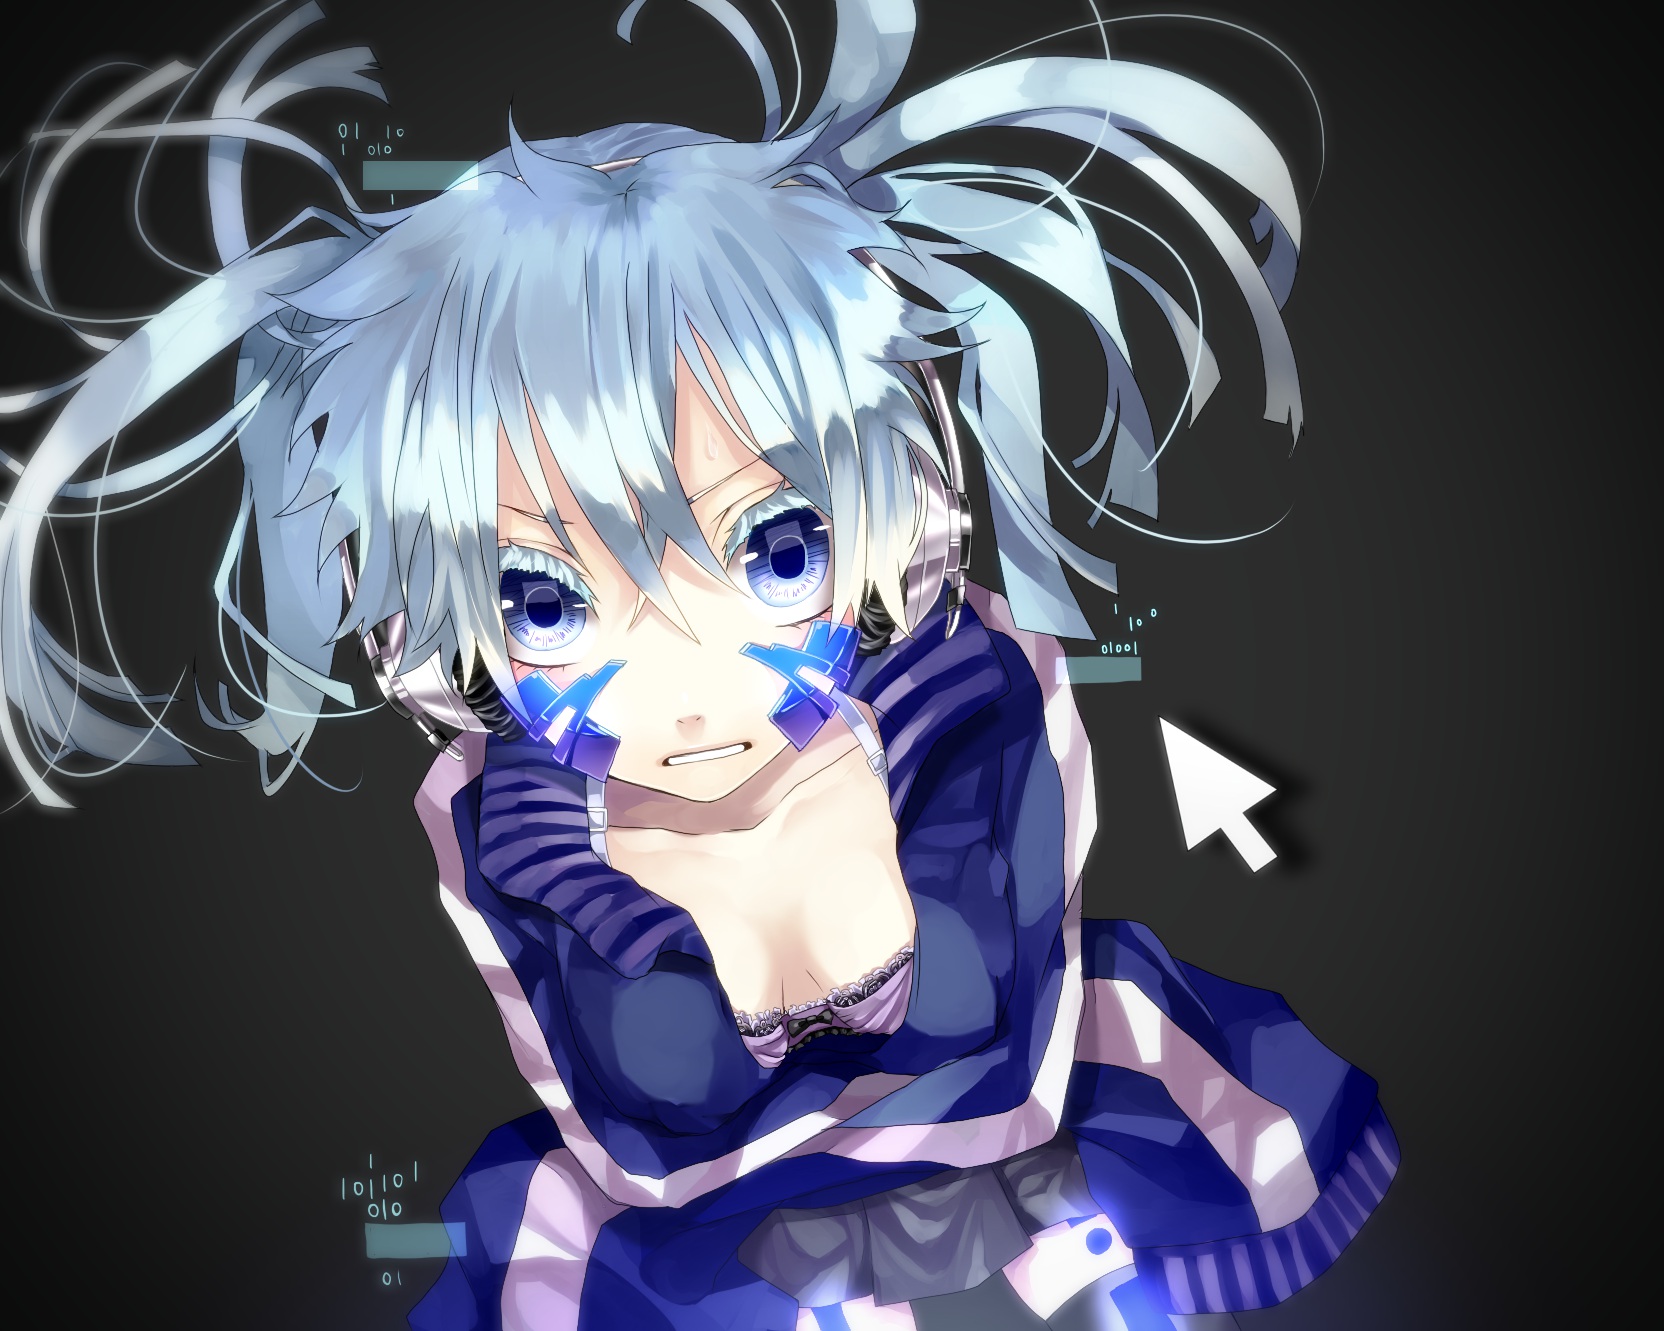 animal, Artificial, Enemy, Vocaloid, Blue, Eyes, Blue, Hair, Ene, Kagerou, Project, Kagerou, Project, Mouse, Ri rihoo, Vocaloid Wallpaper